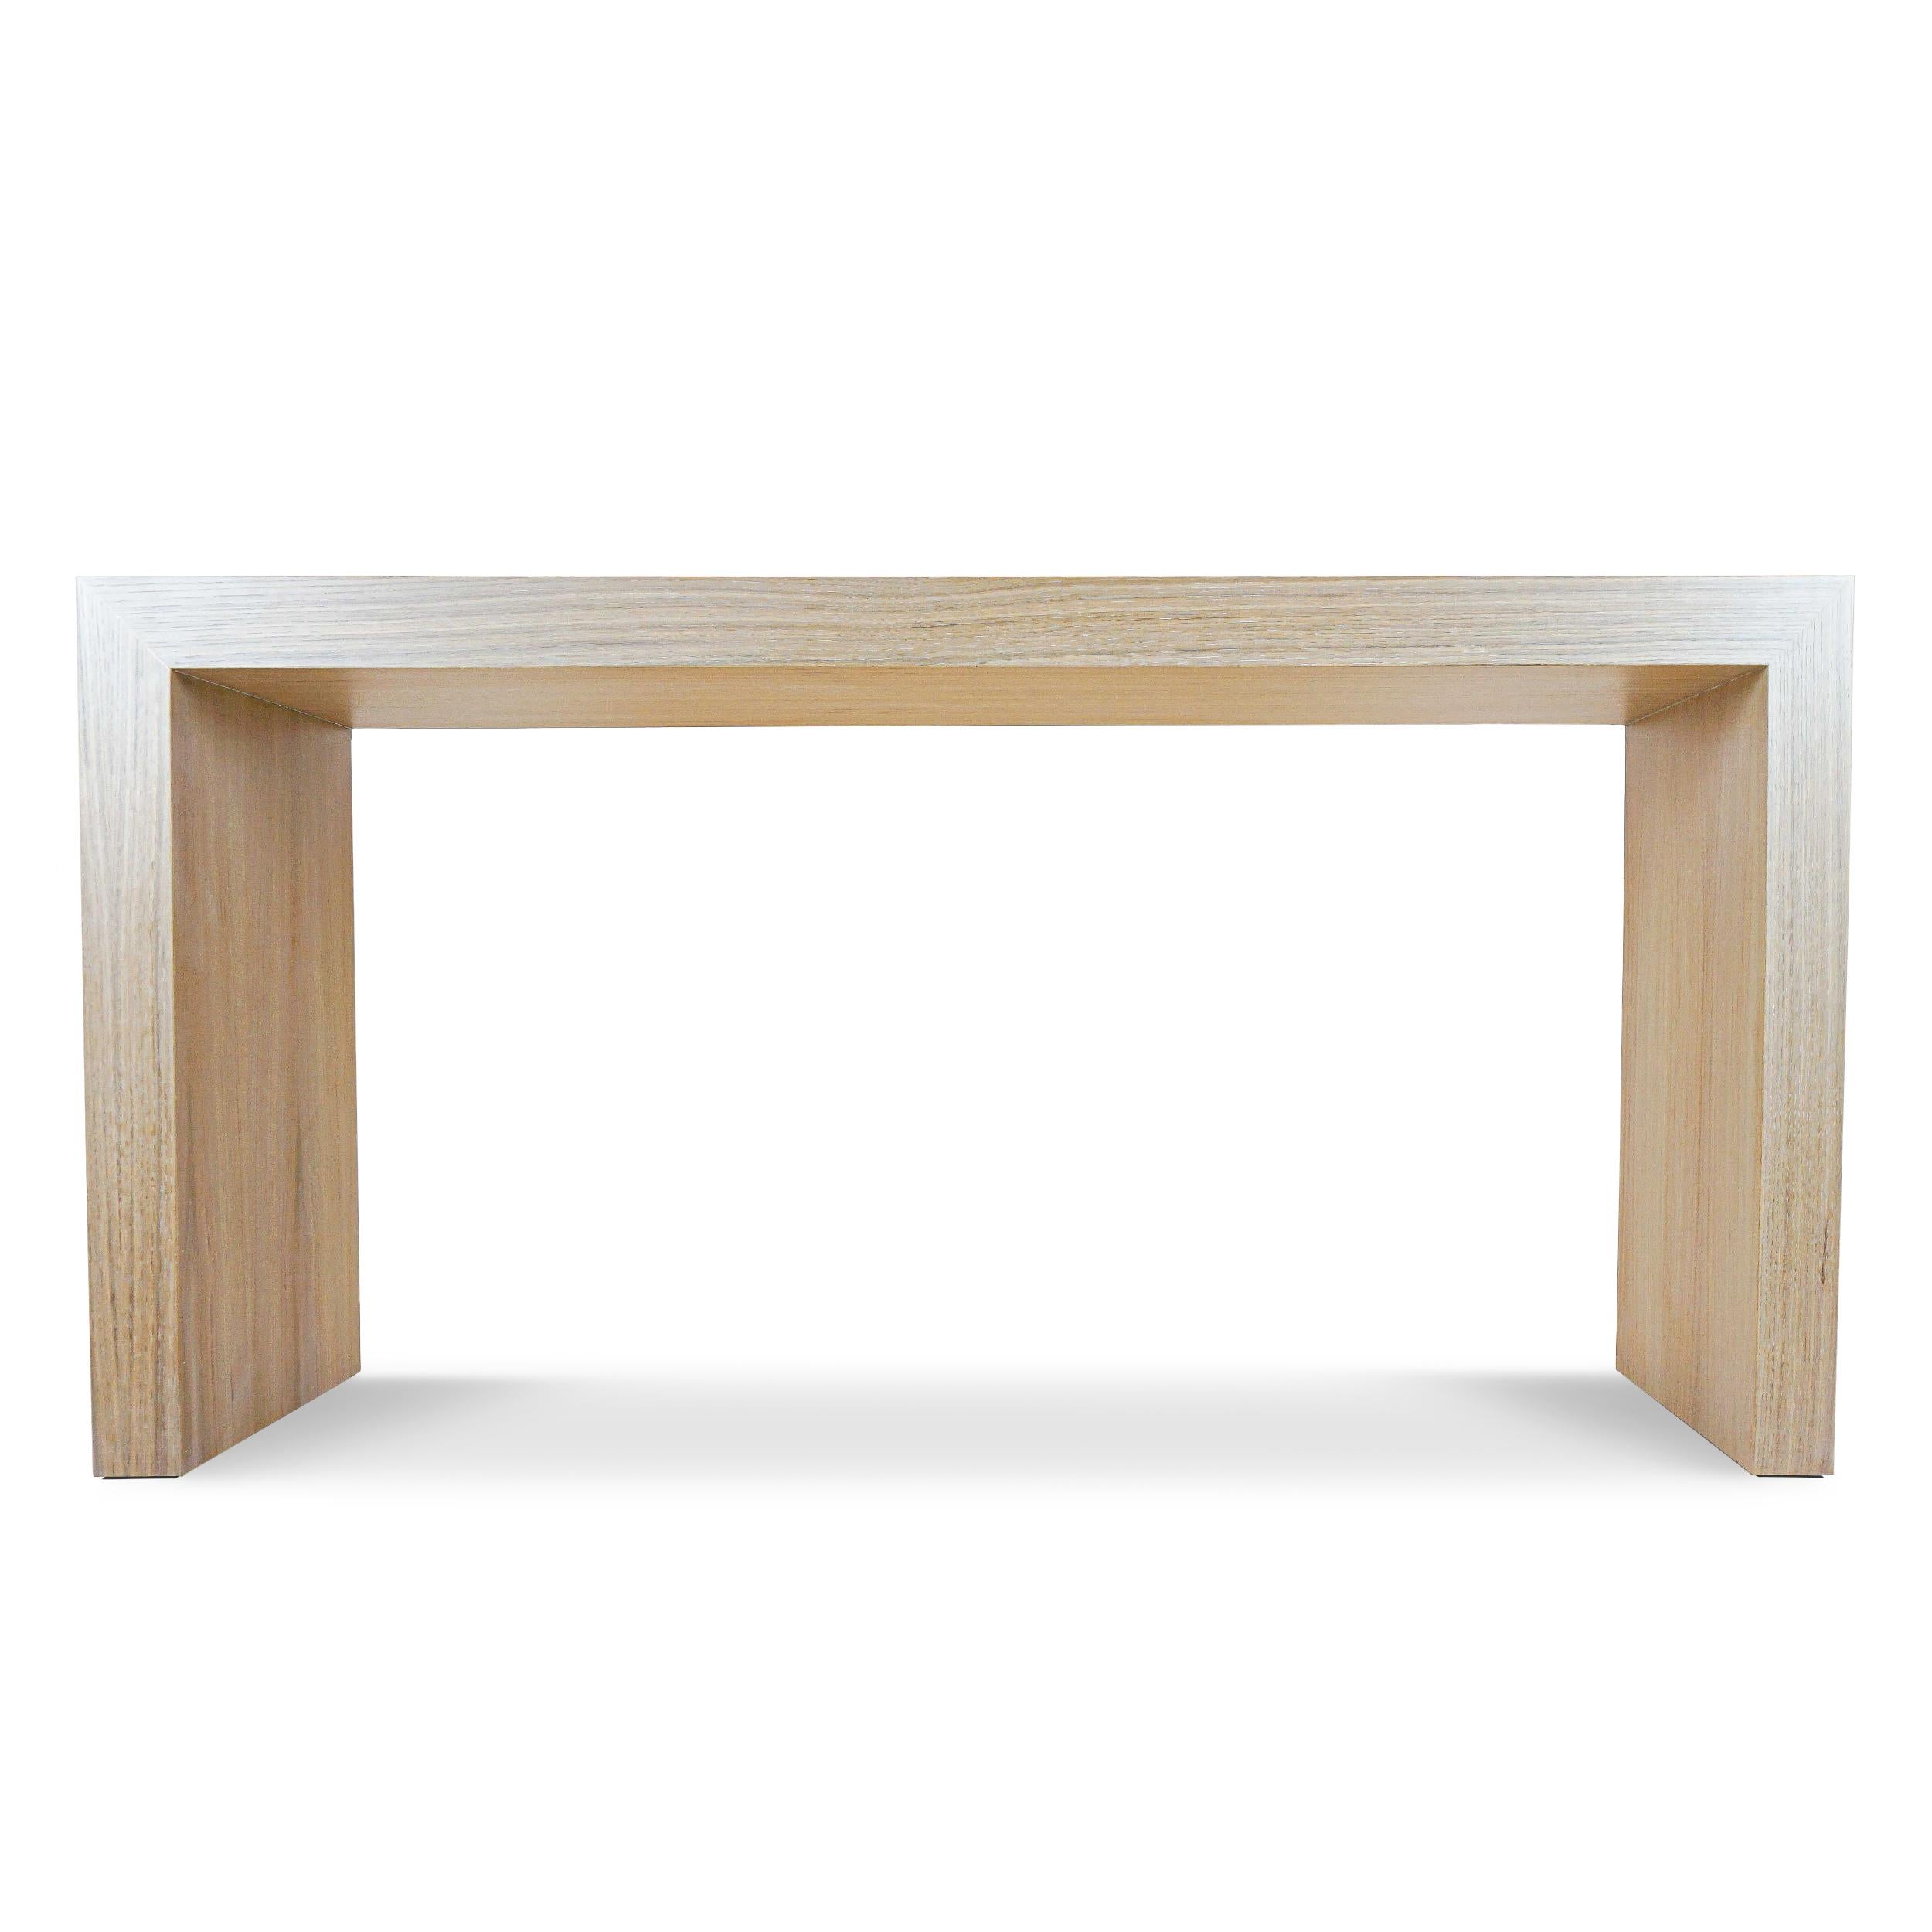 Waterfall console with white oak veneer finished clear. Easy to customize in size and stain color. Made by hand in Connecticut.

Measurements:
Overall: 60”W x 16”D x 30.5”H
Thickness: 3